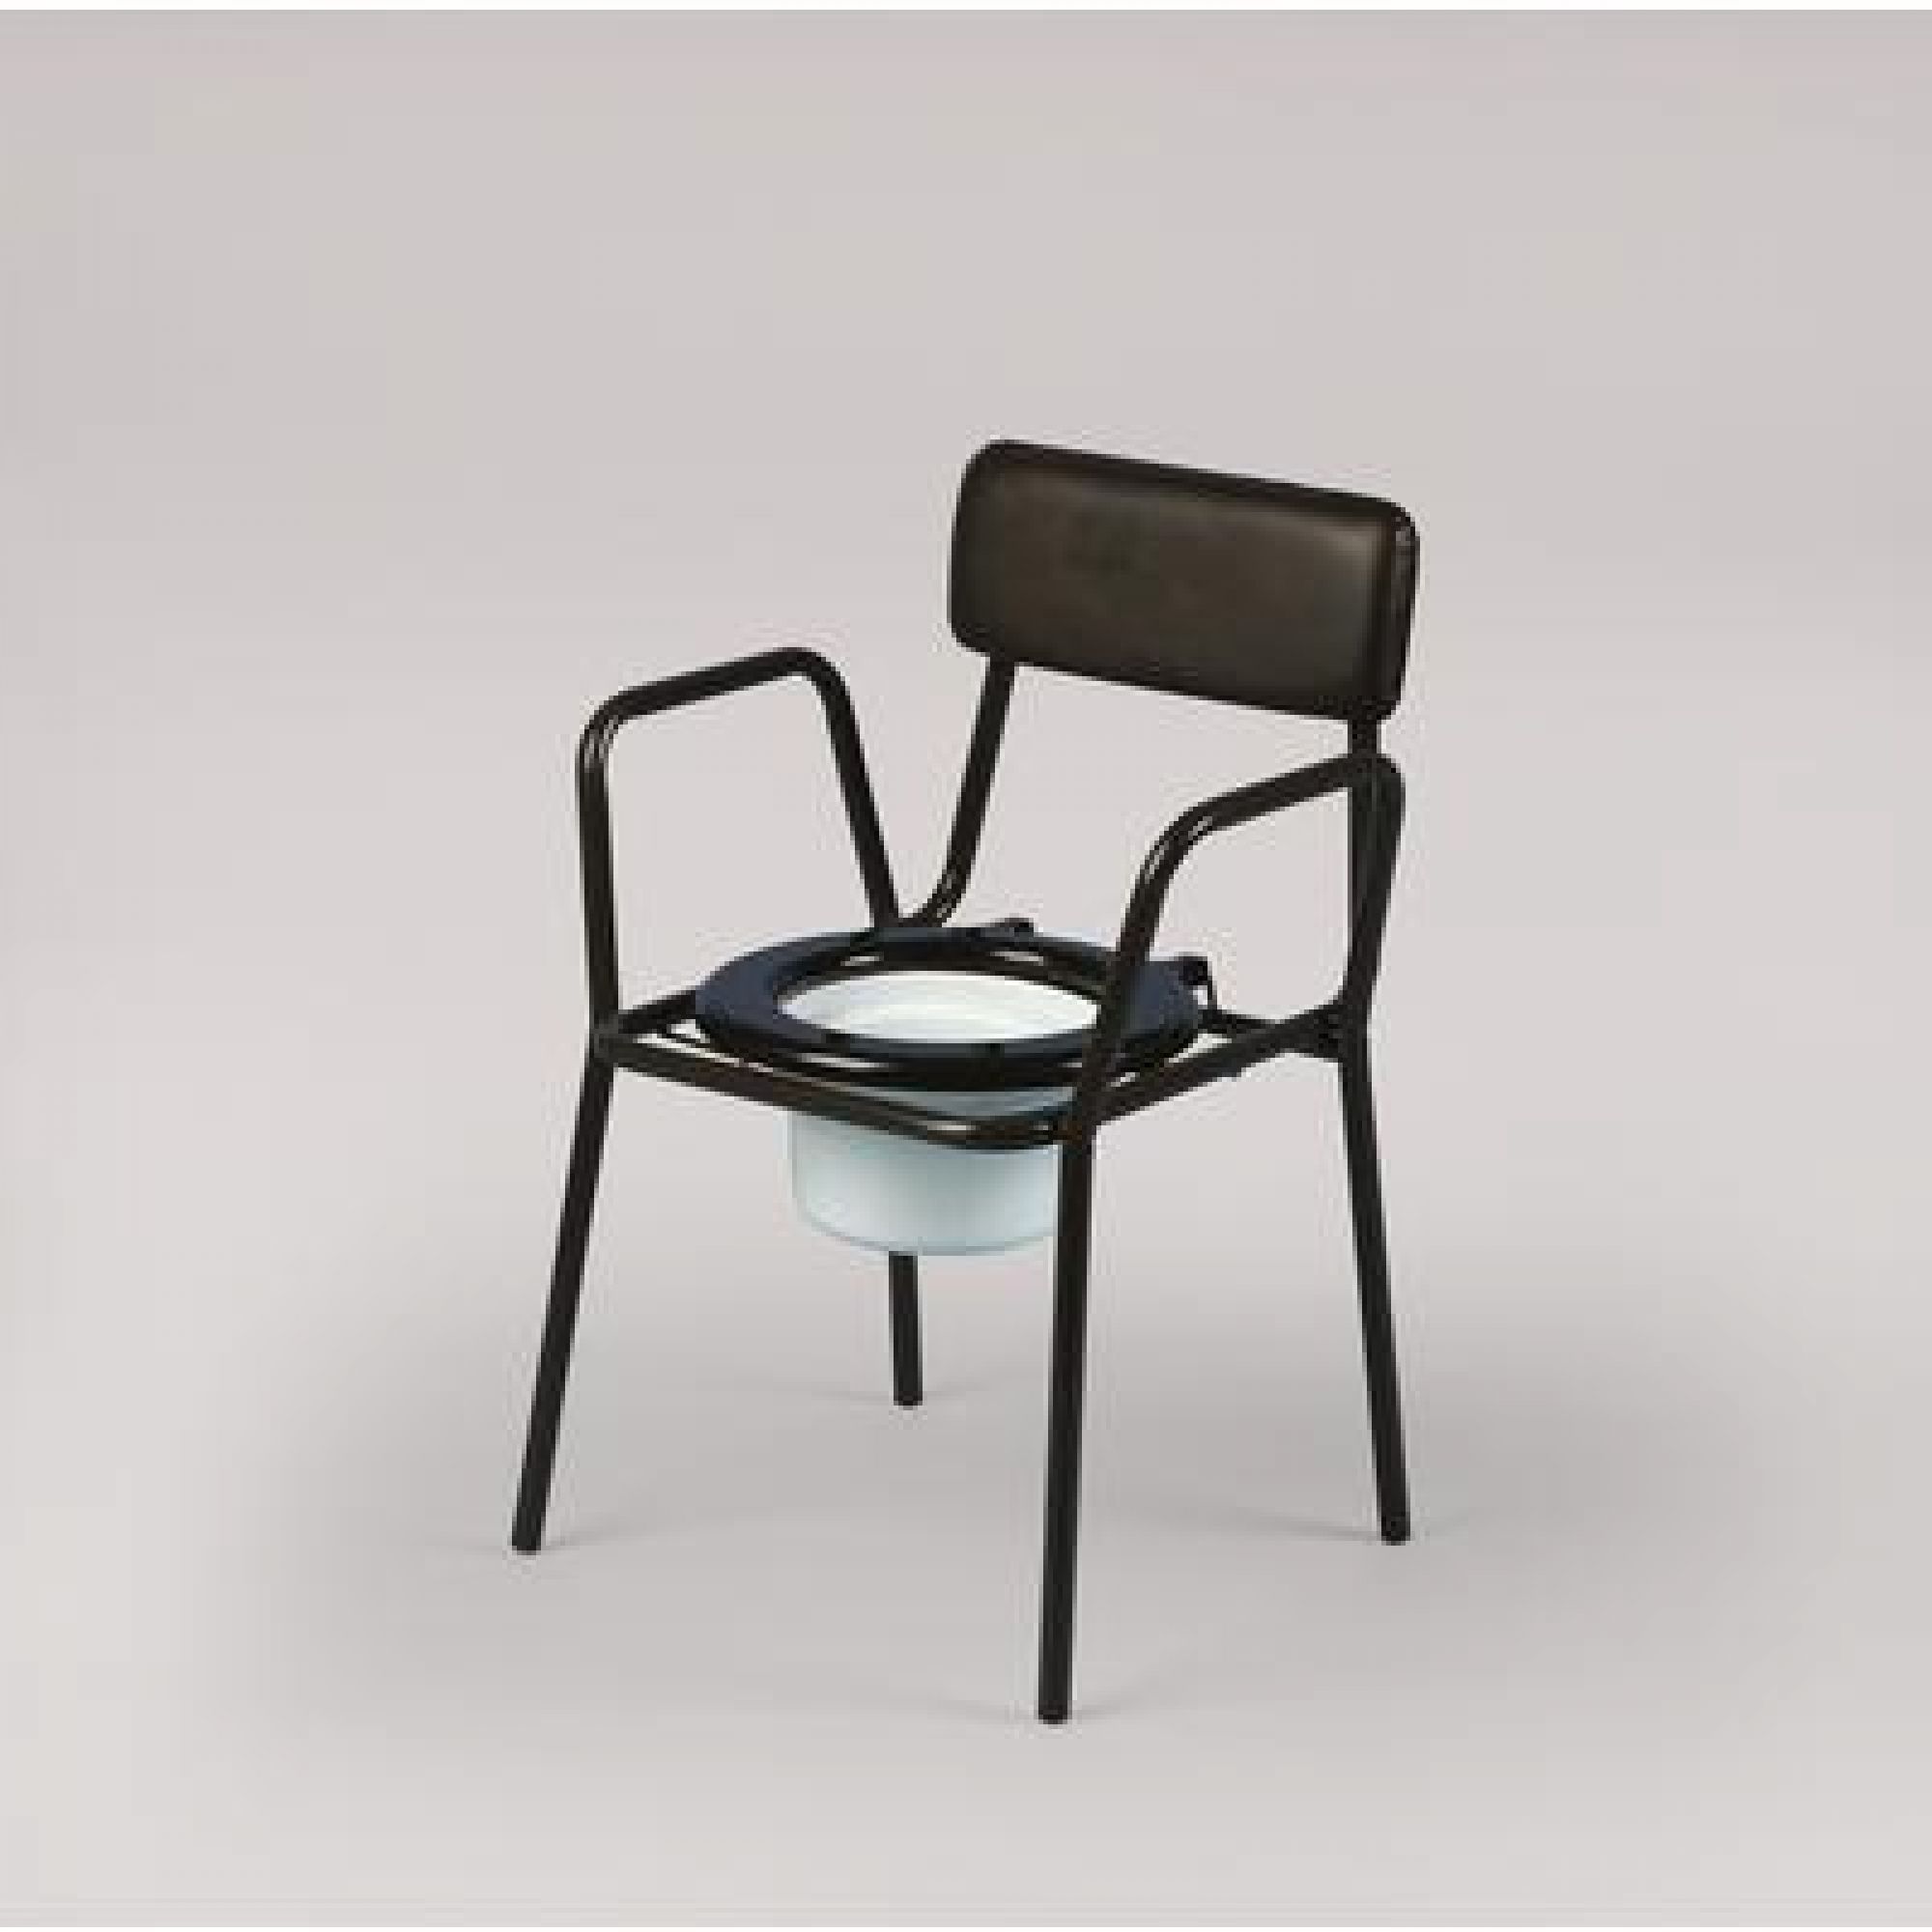 Stackable Commode with arms (Calder)